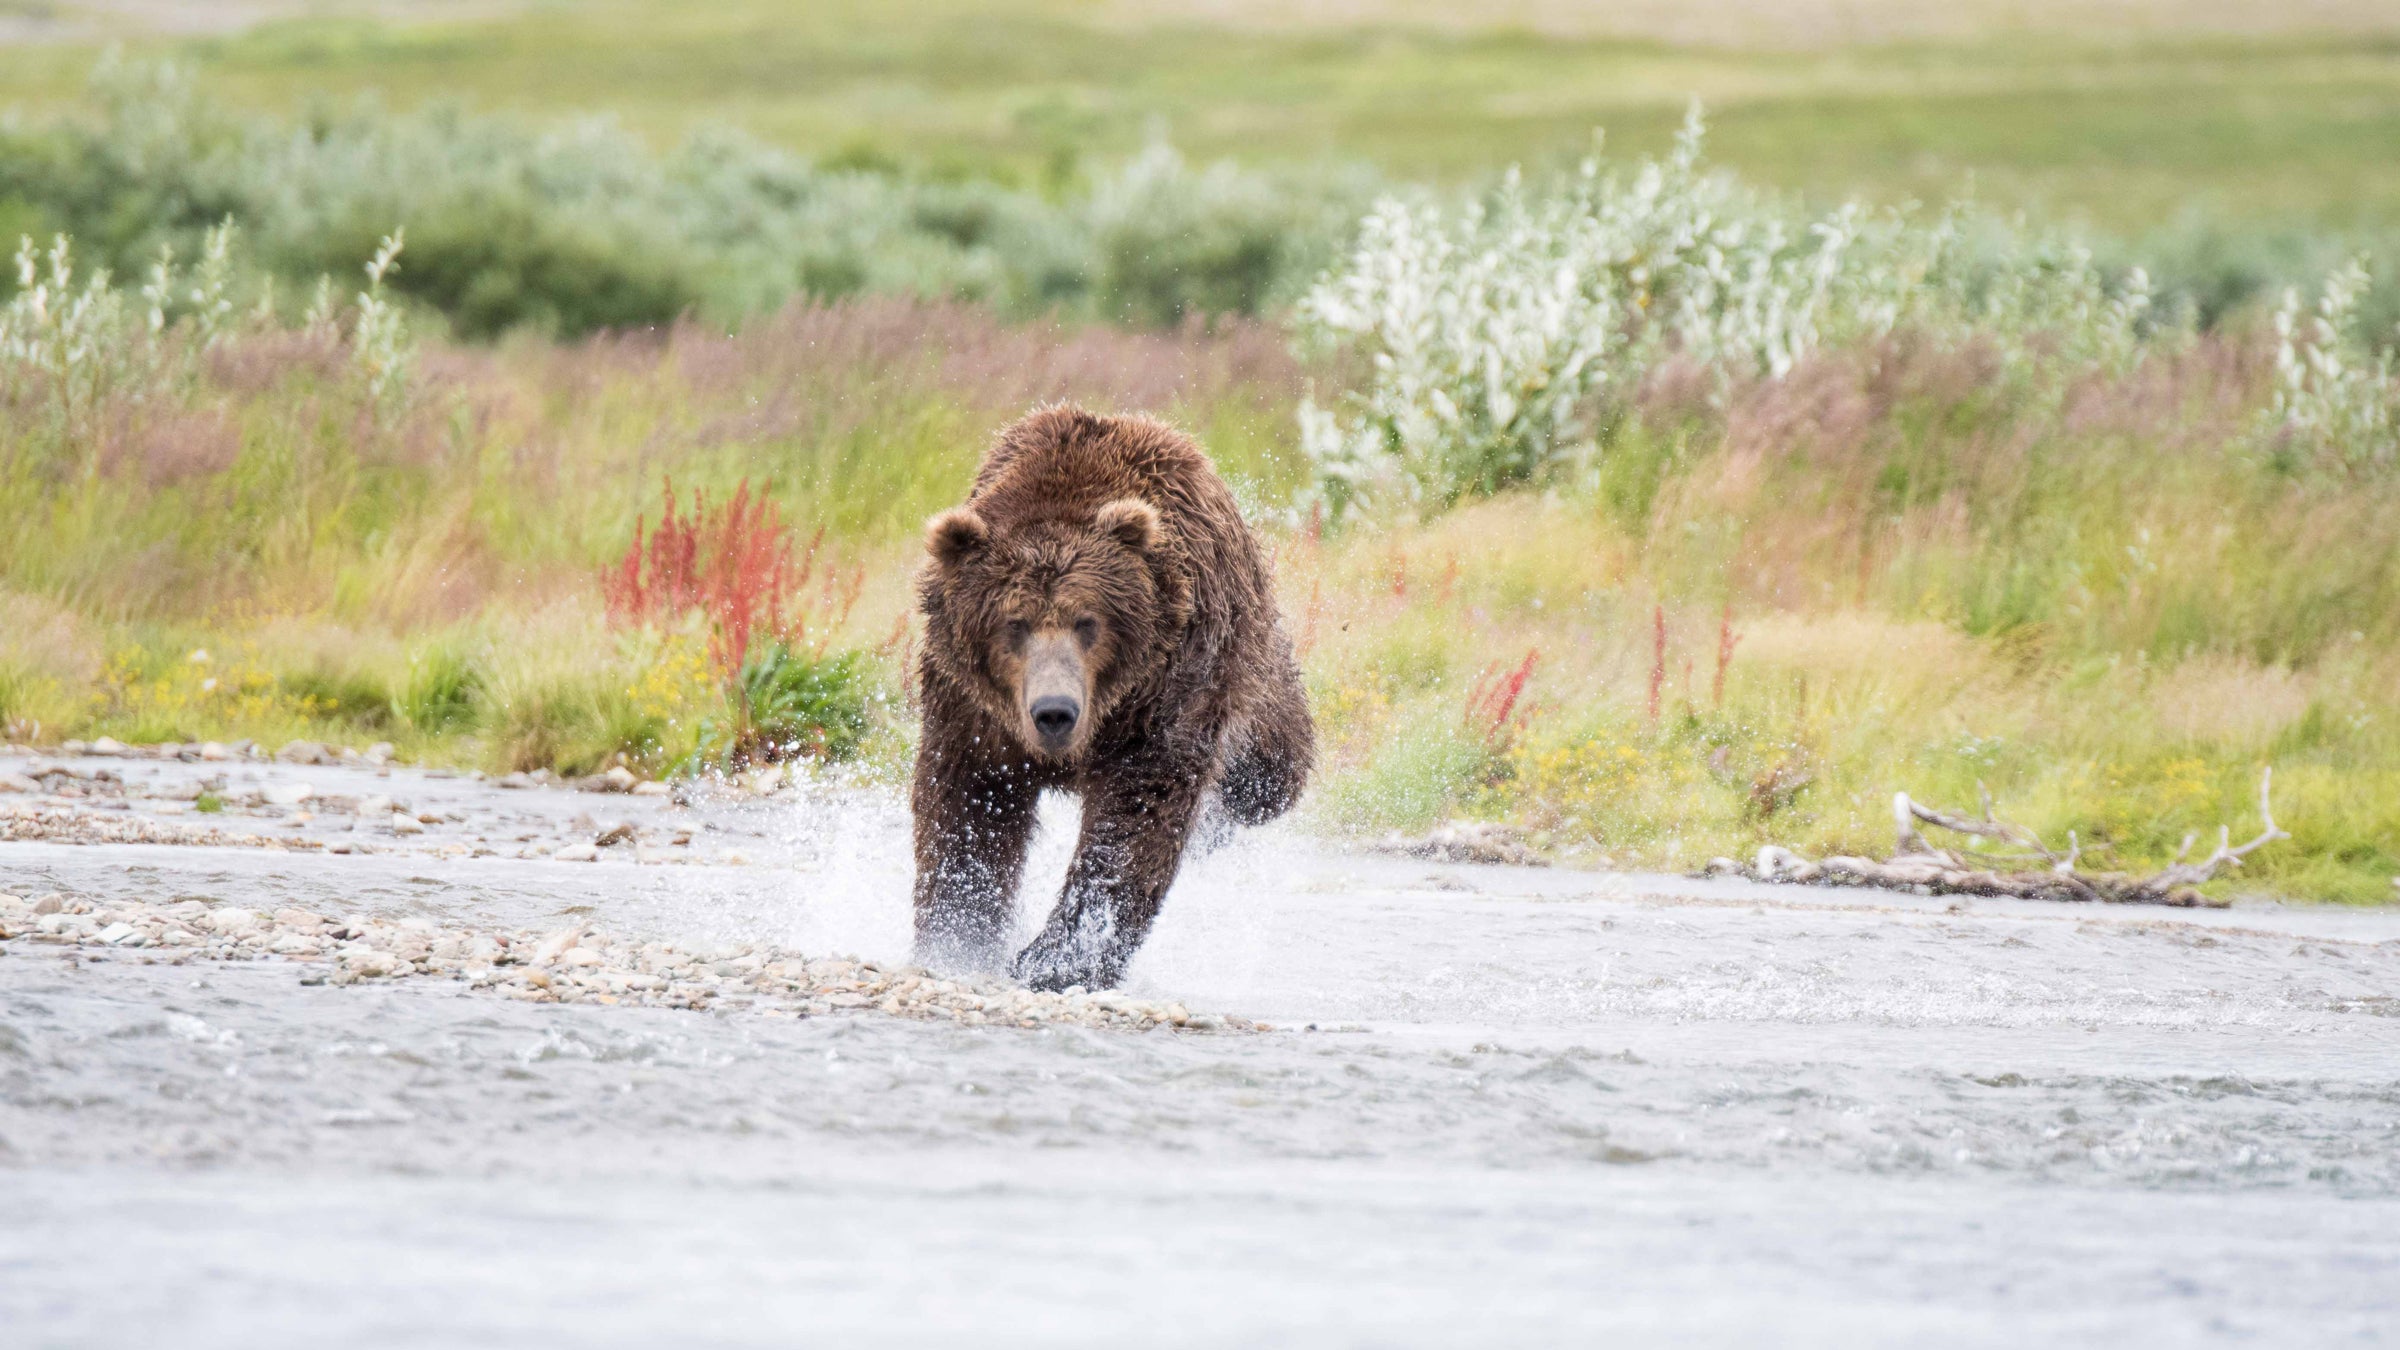 How Fast Can a Bear Run? + What to Do in a Bear Encounter